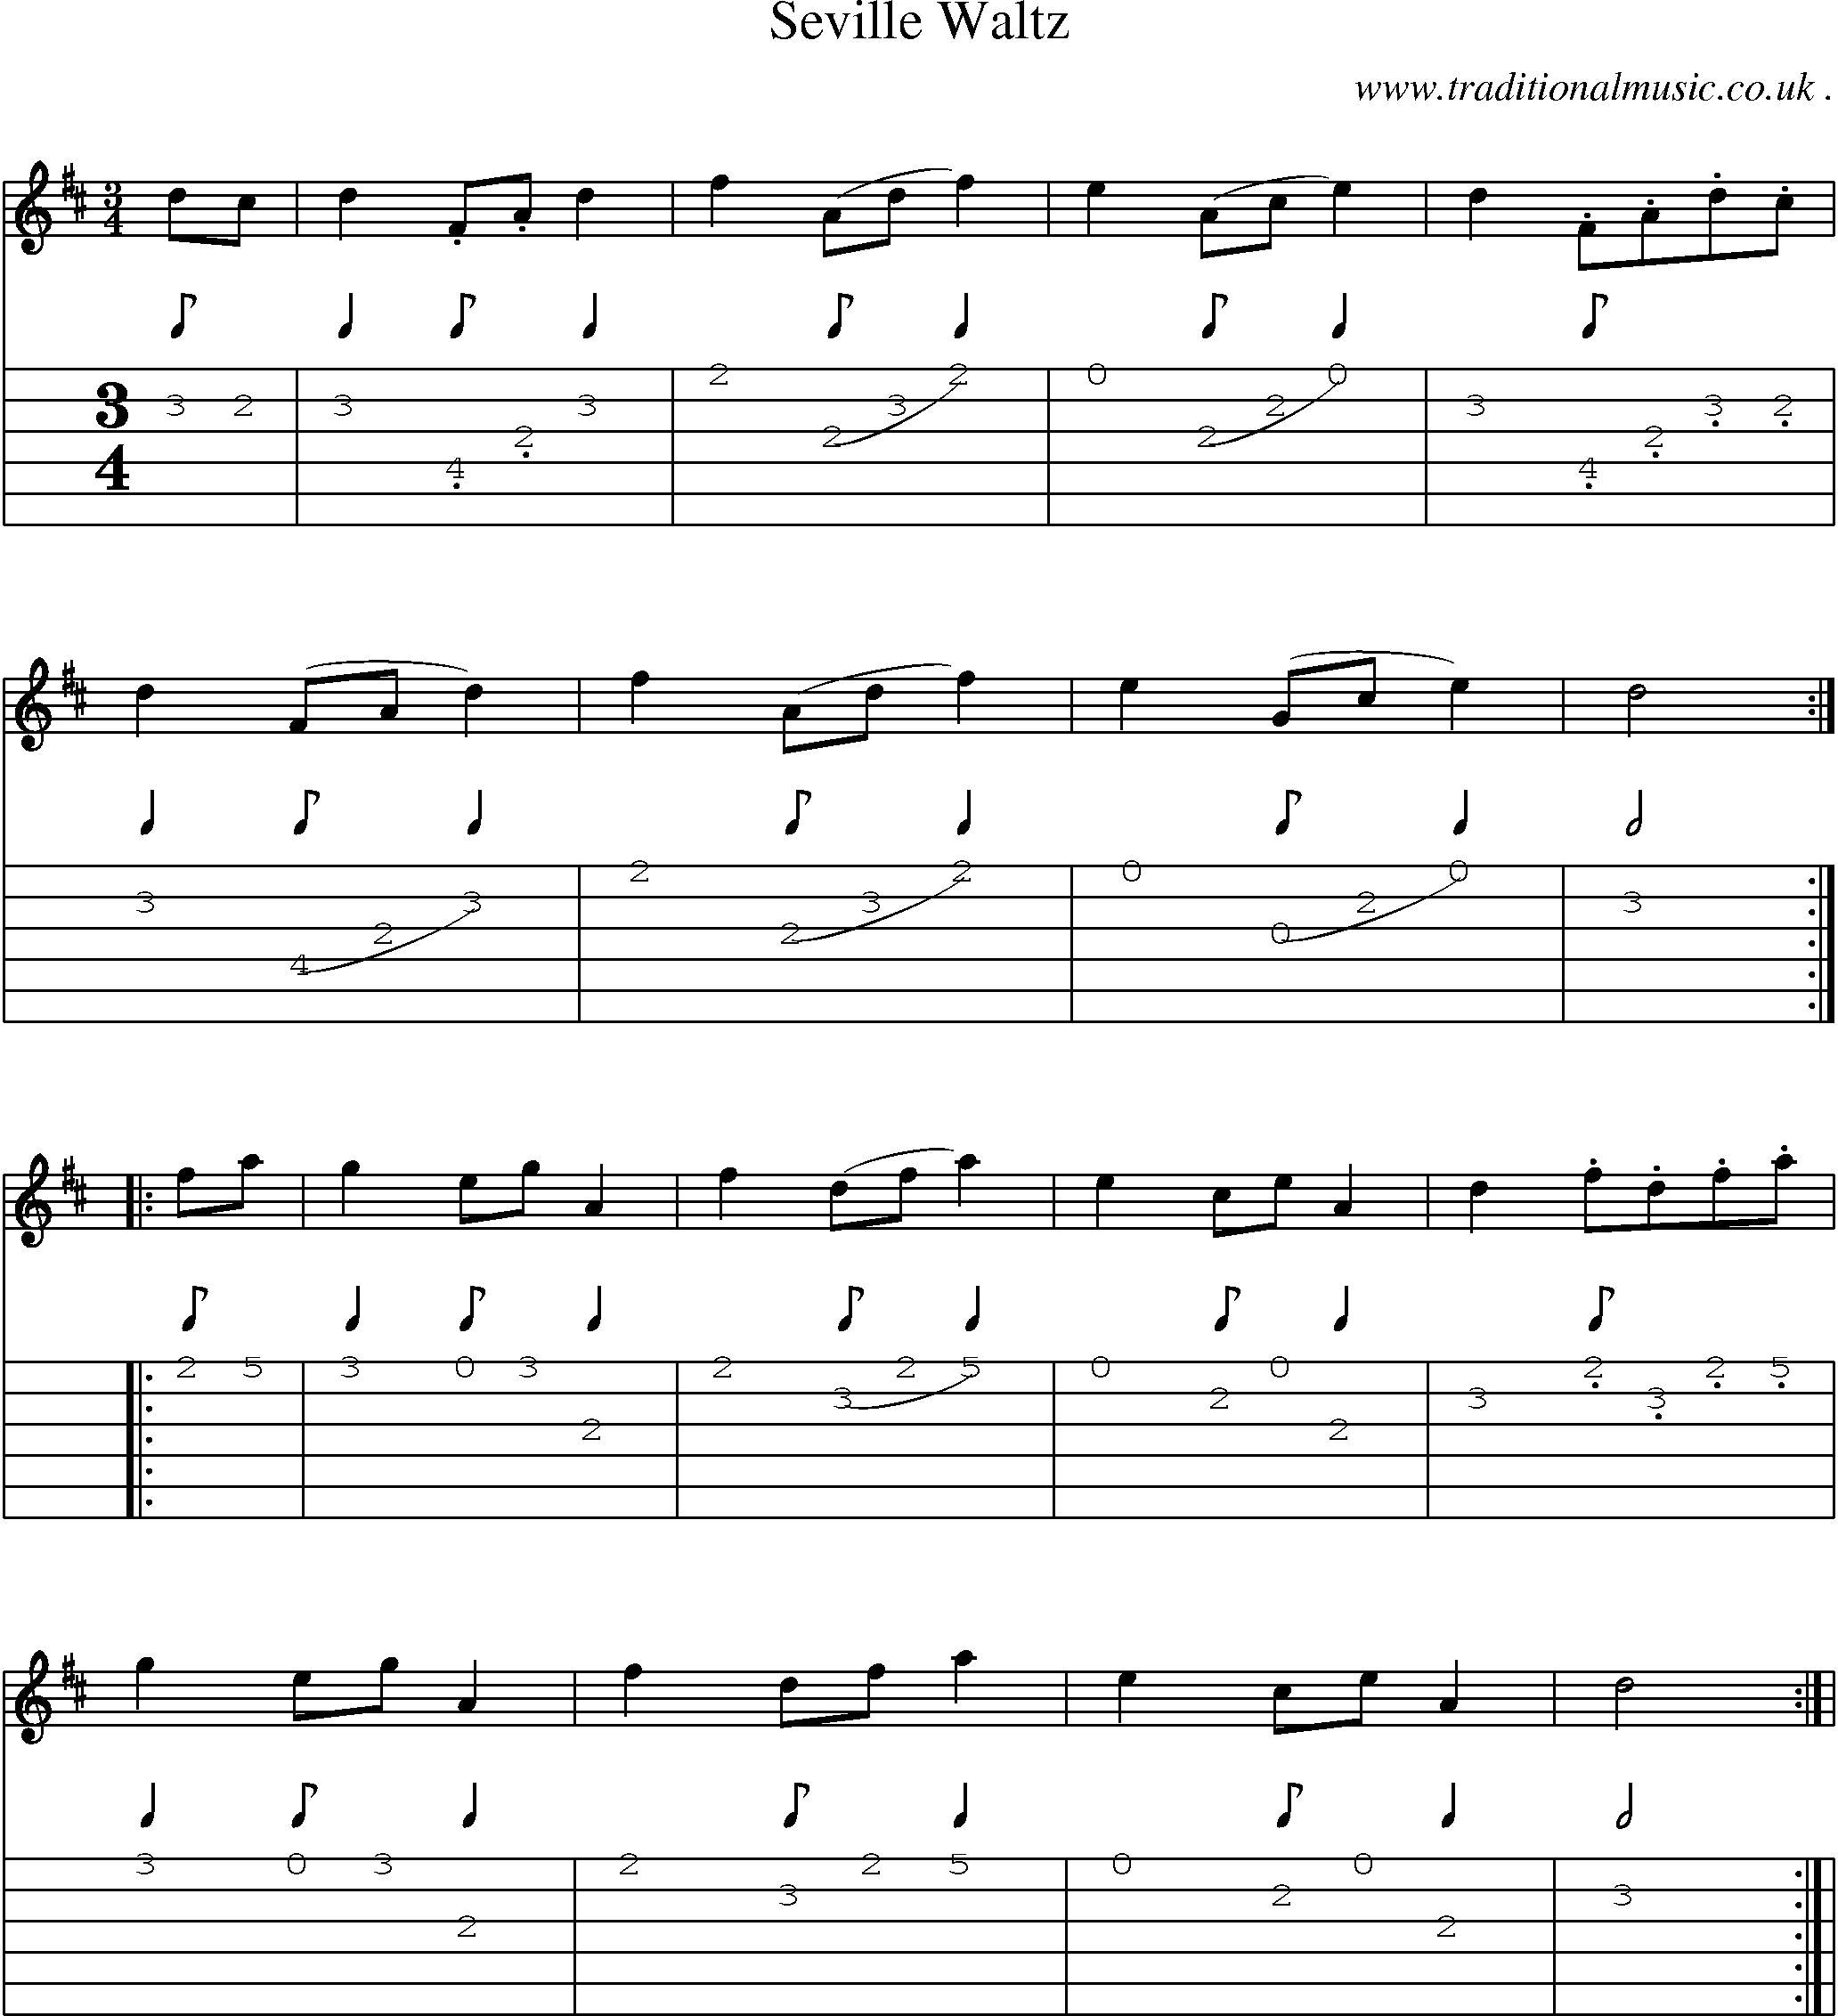 Sheet-Music and Guitar Tabs for Seville Waltz